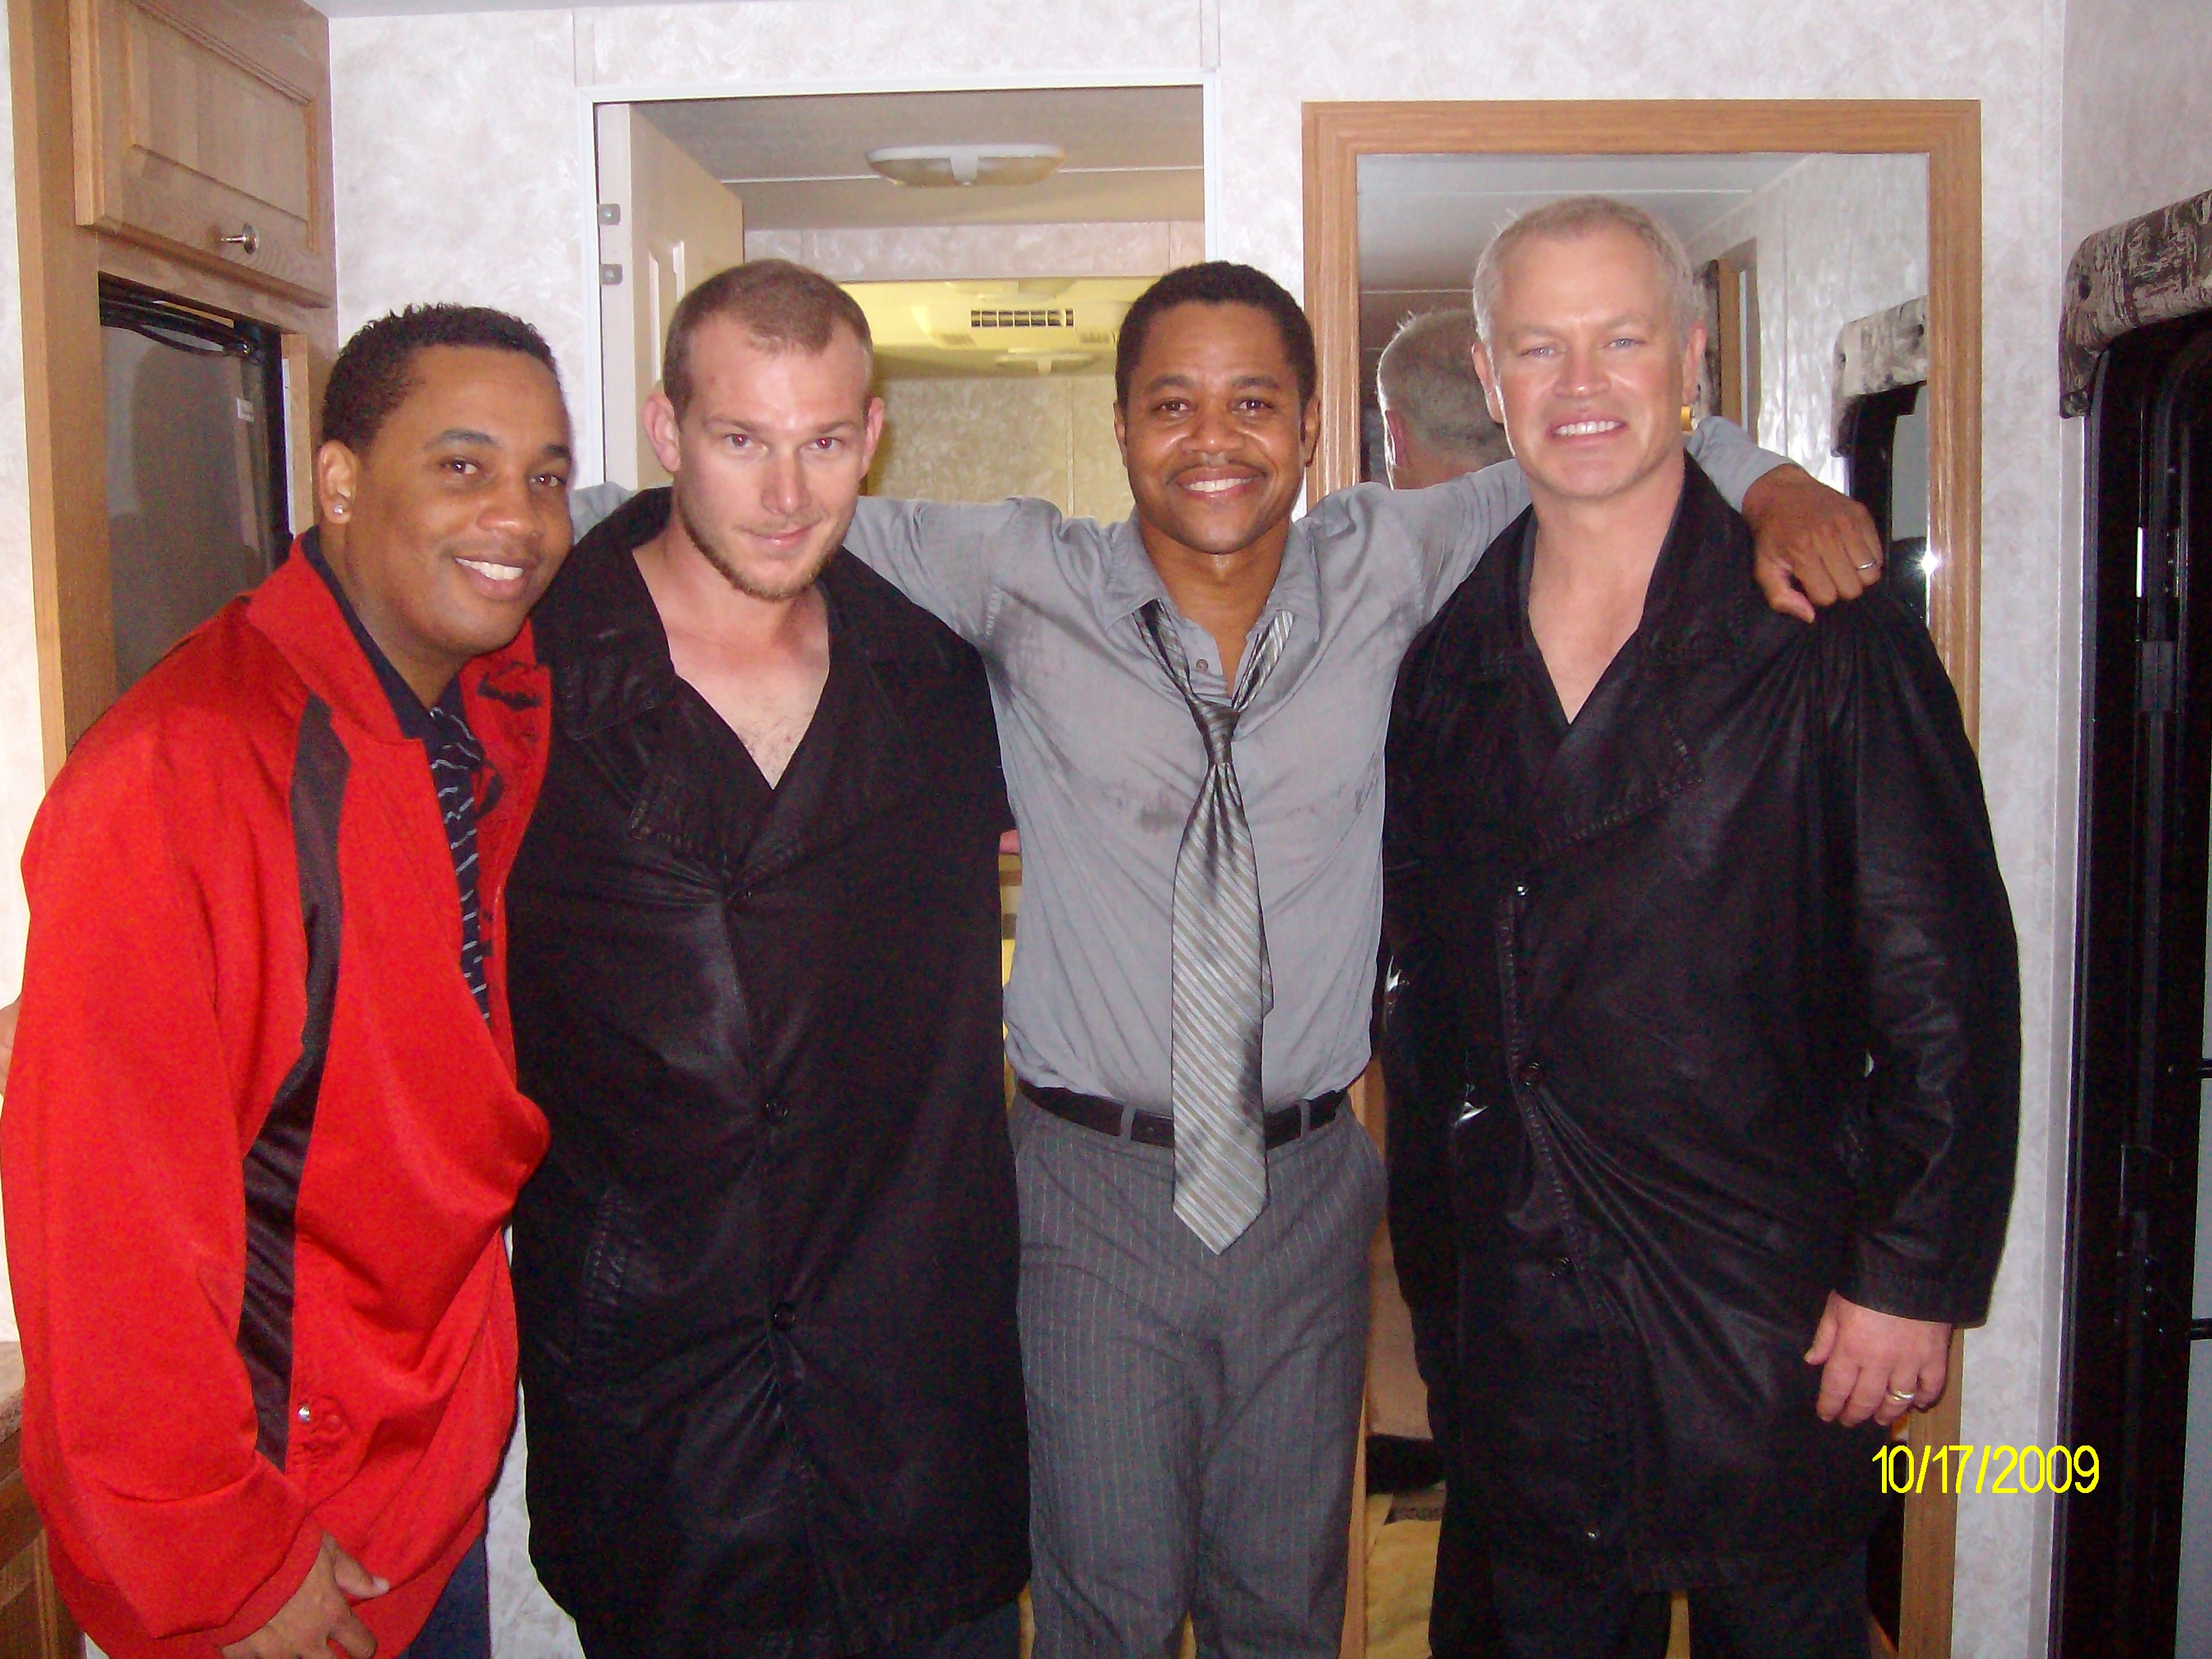 From left to right, Keith Butler, Lumberjack, Cuba Gooding Jr., Neal McDonough.